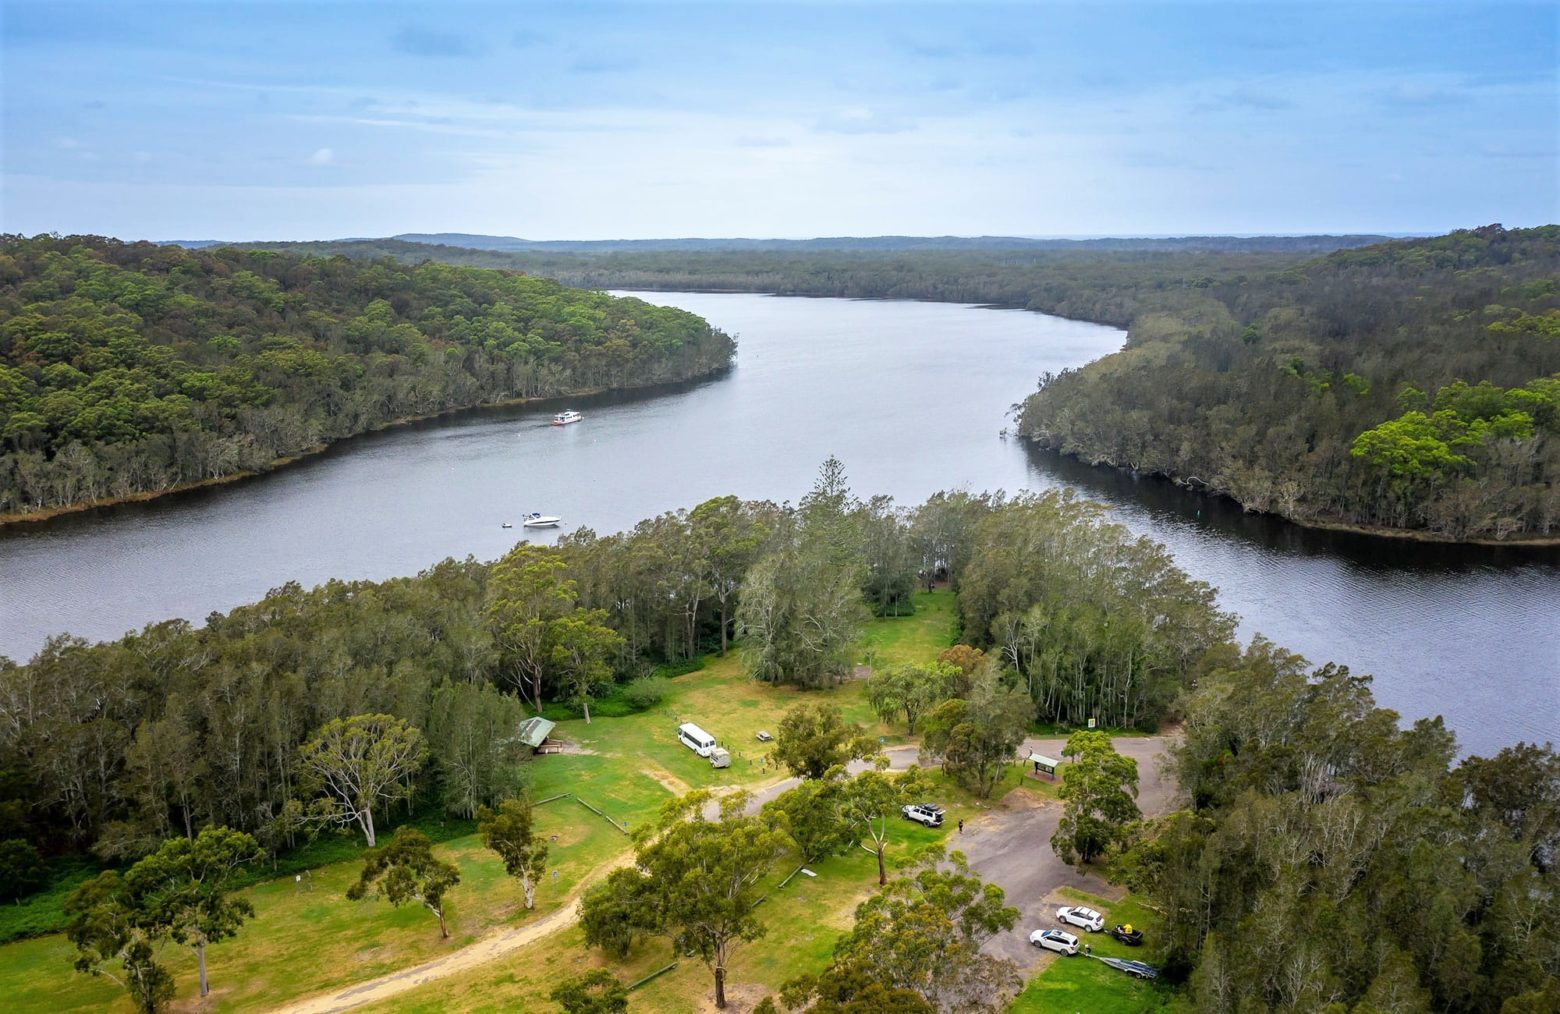 Violet Hill Campground in Myall Lakes National Park.